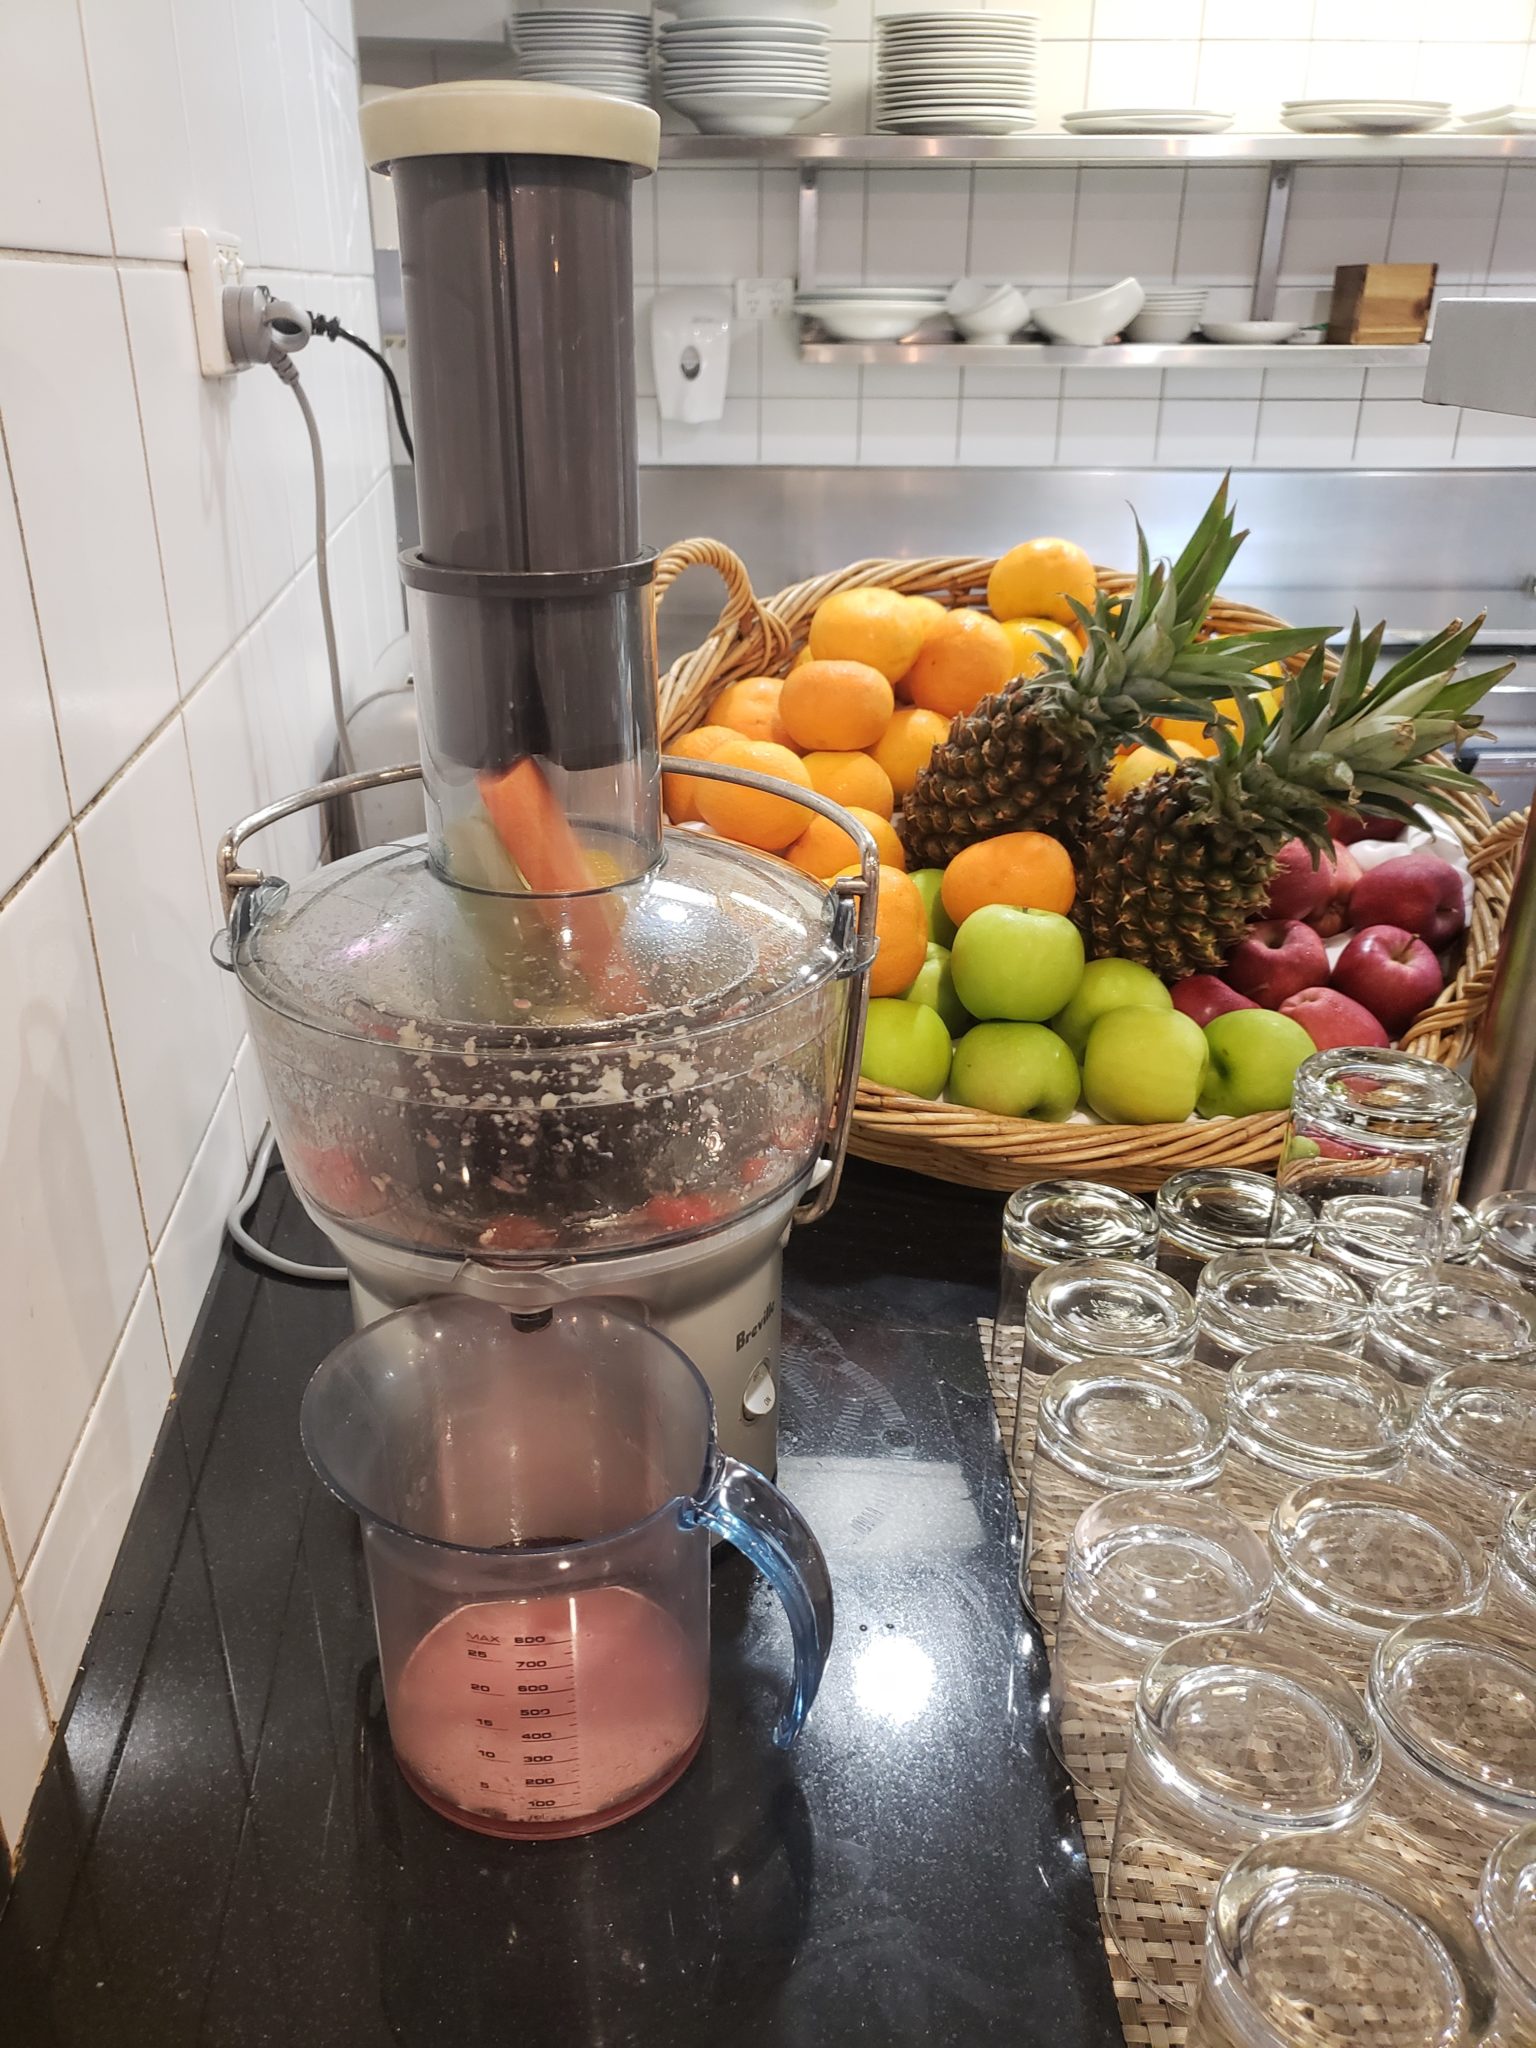 a juicer and fruit in a basket